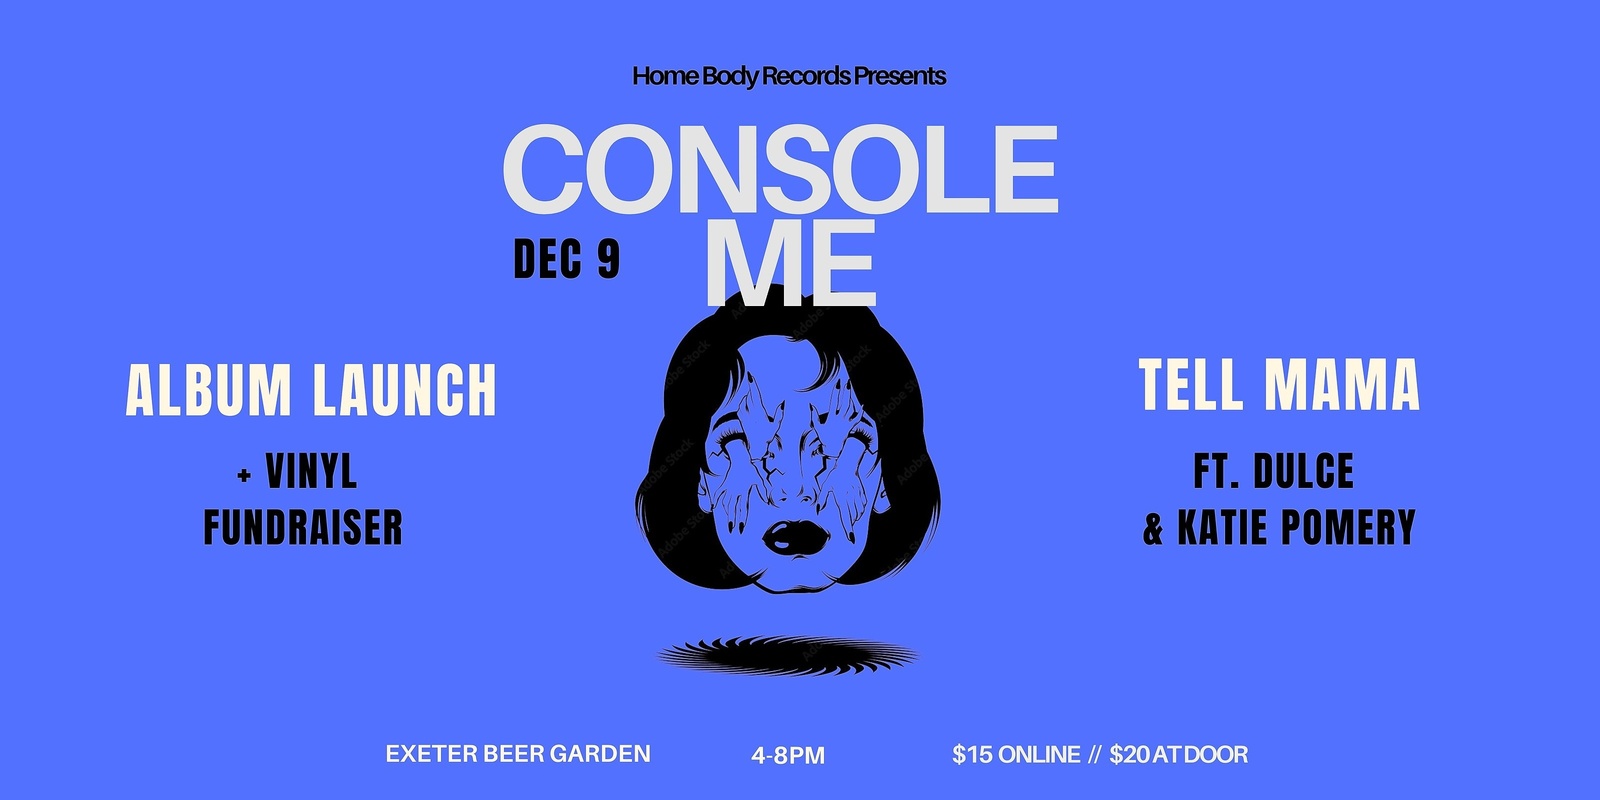 Banner image for Tell Mama 'CONSOLE ME' album launch @ Exeter Beer Garden